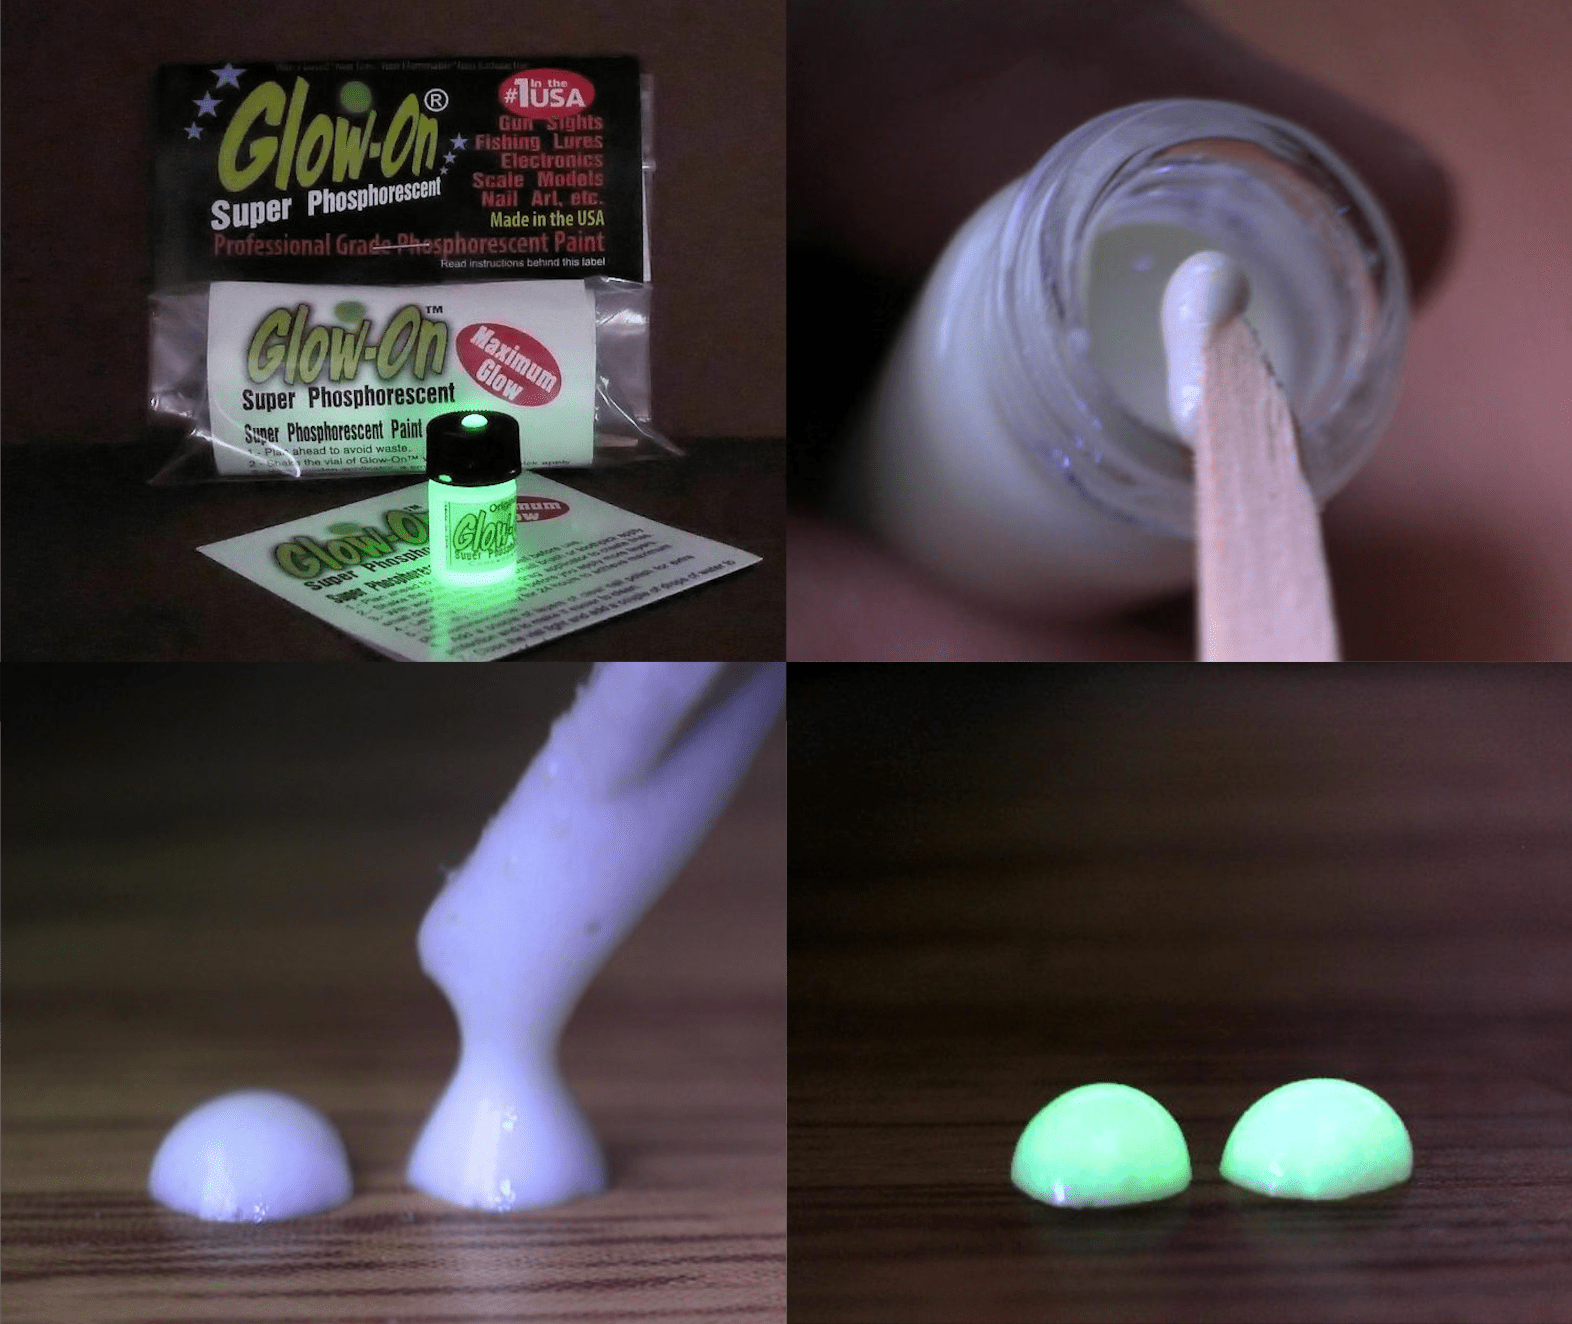 Glow-on® Super Phosphorescent Glow Paint Small 2.3 Ml Vial YELLOW 